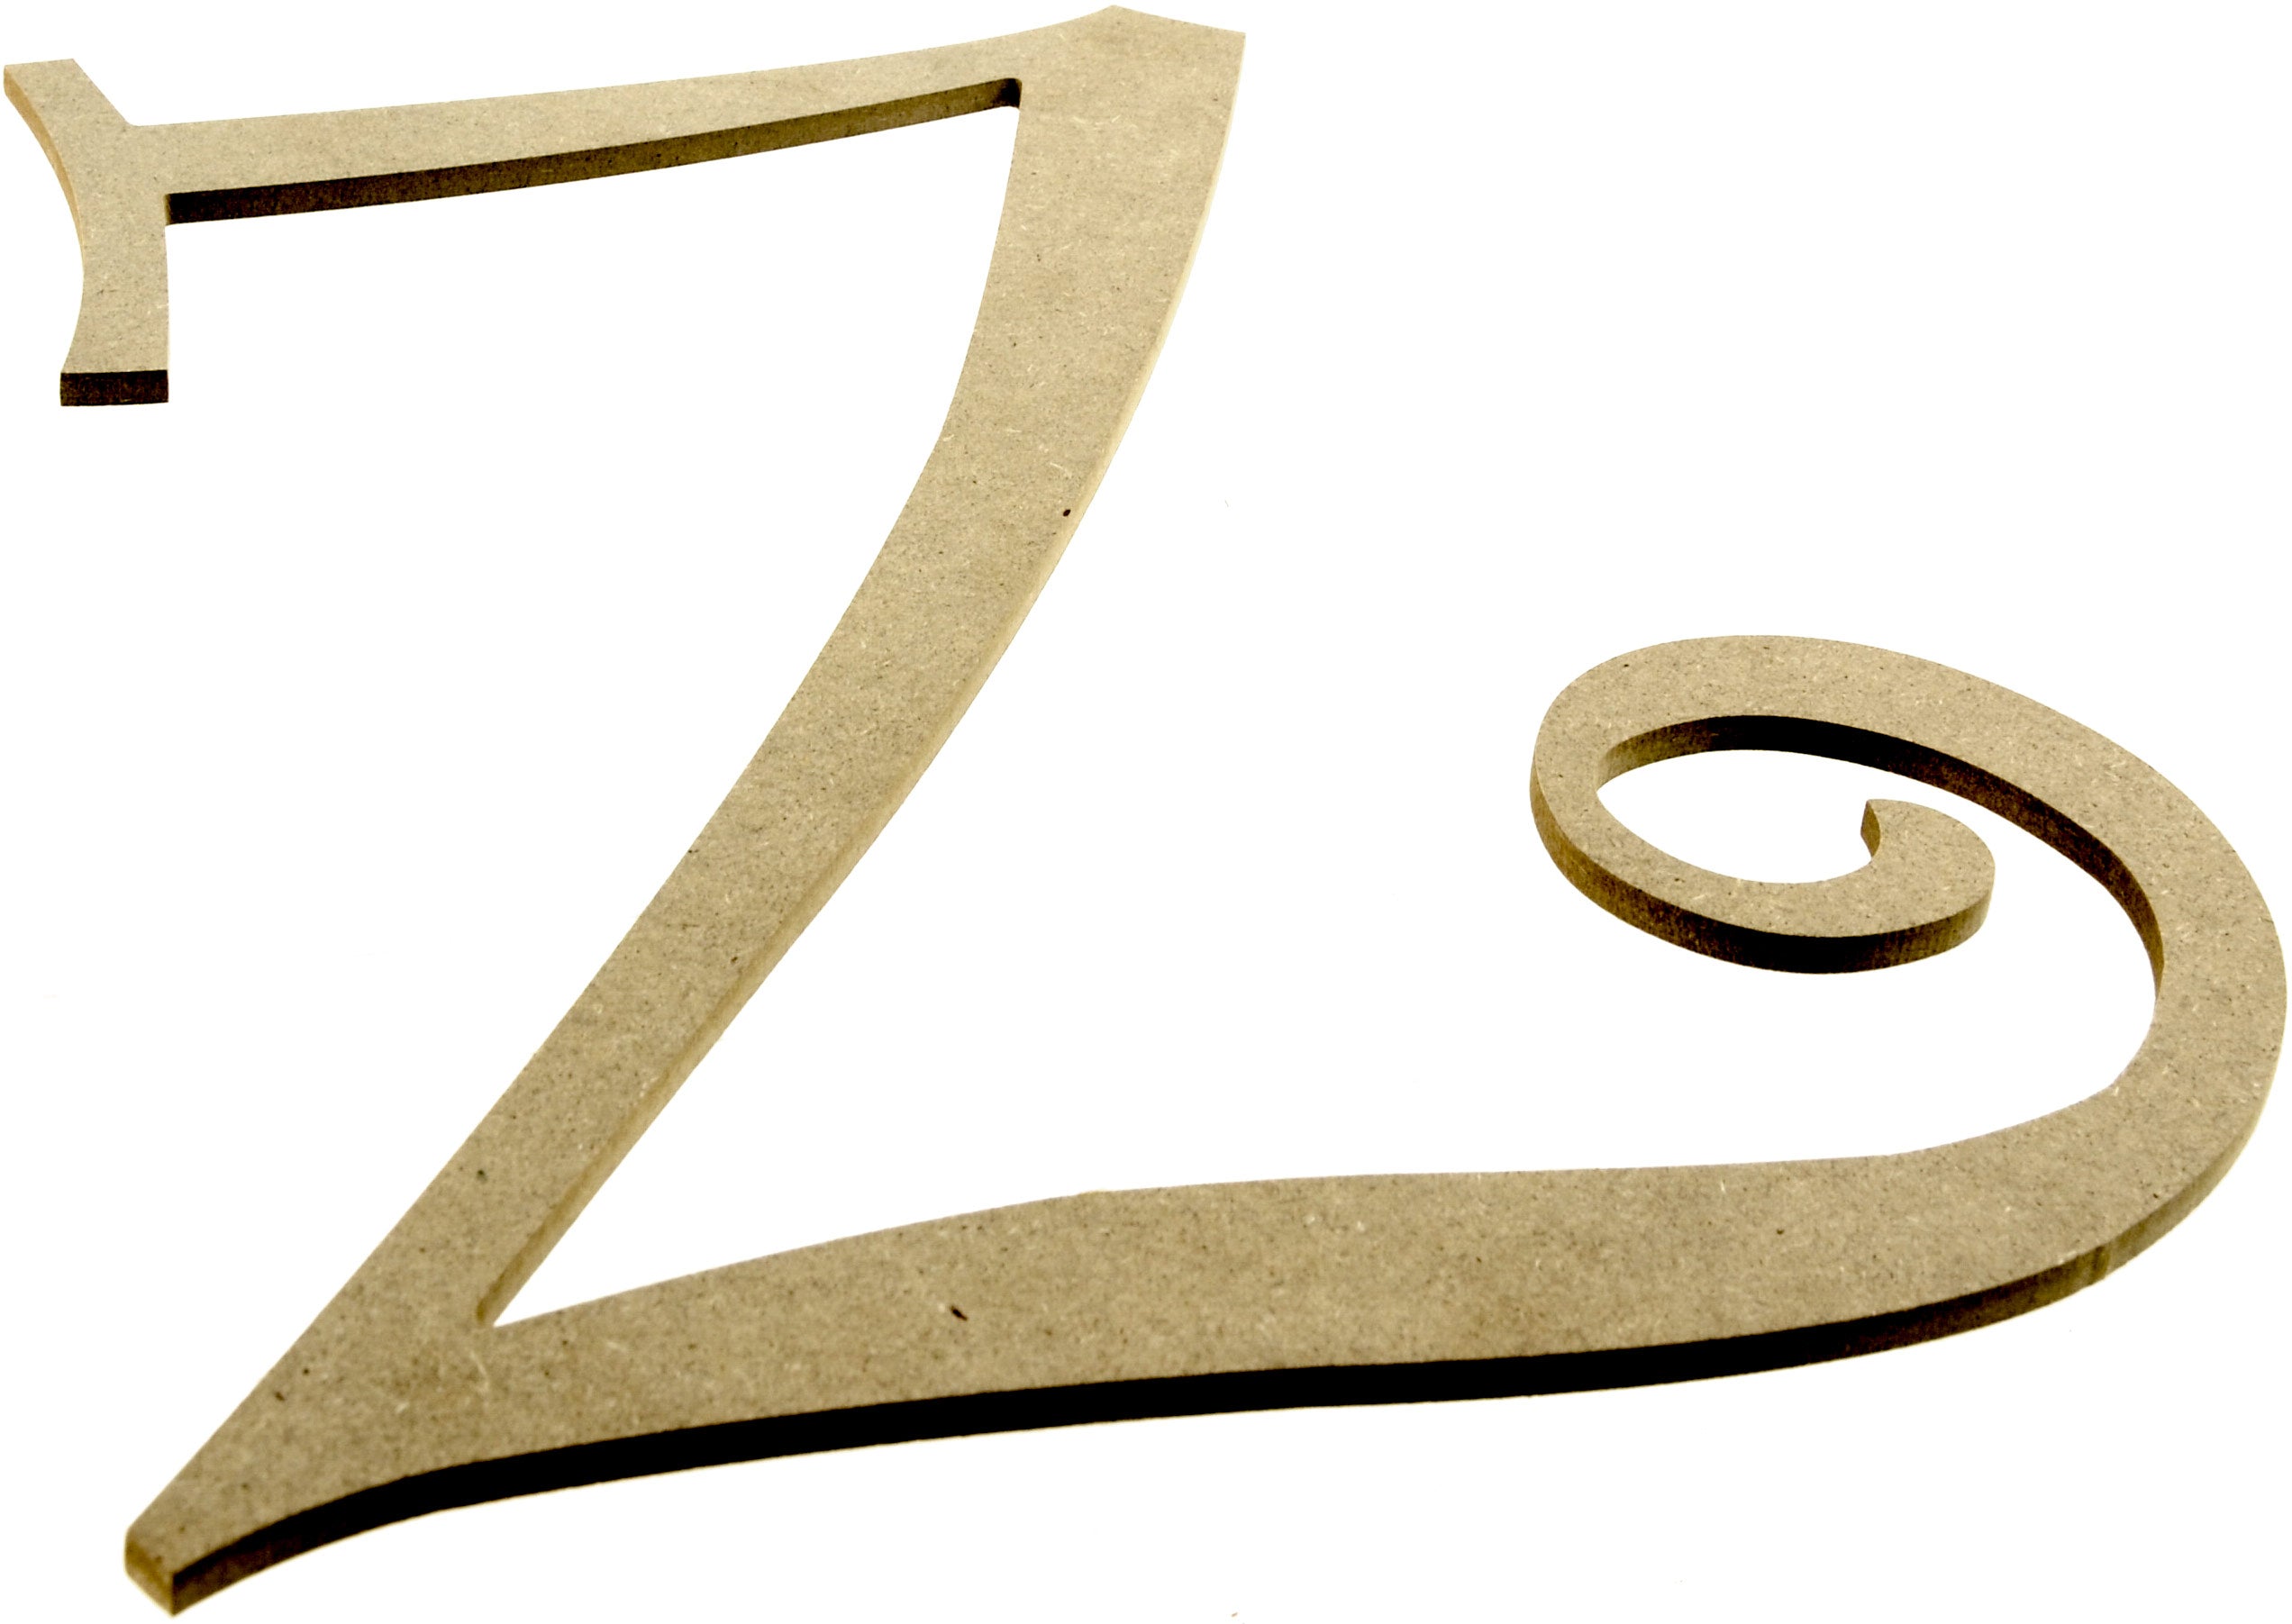 14" Decorative Wooden Curly Letter: Z